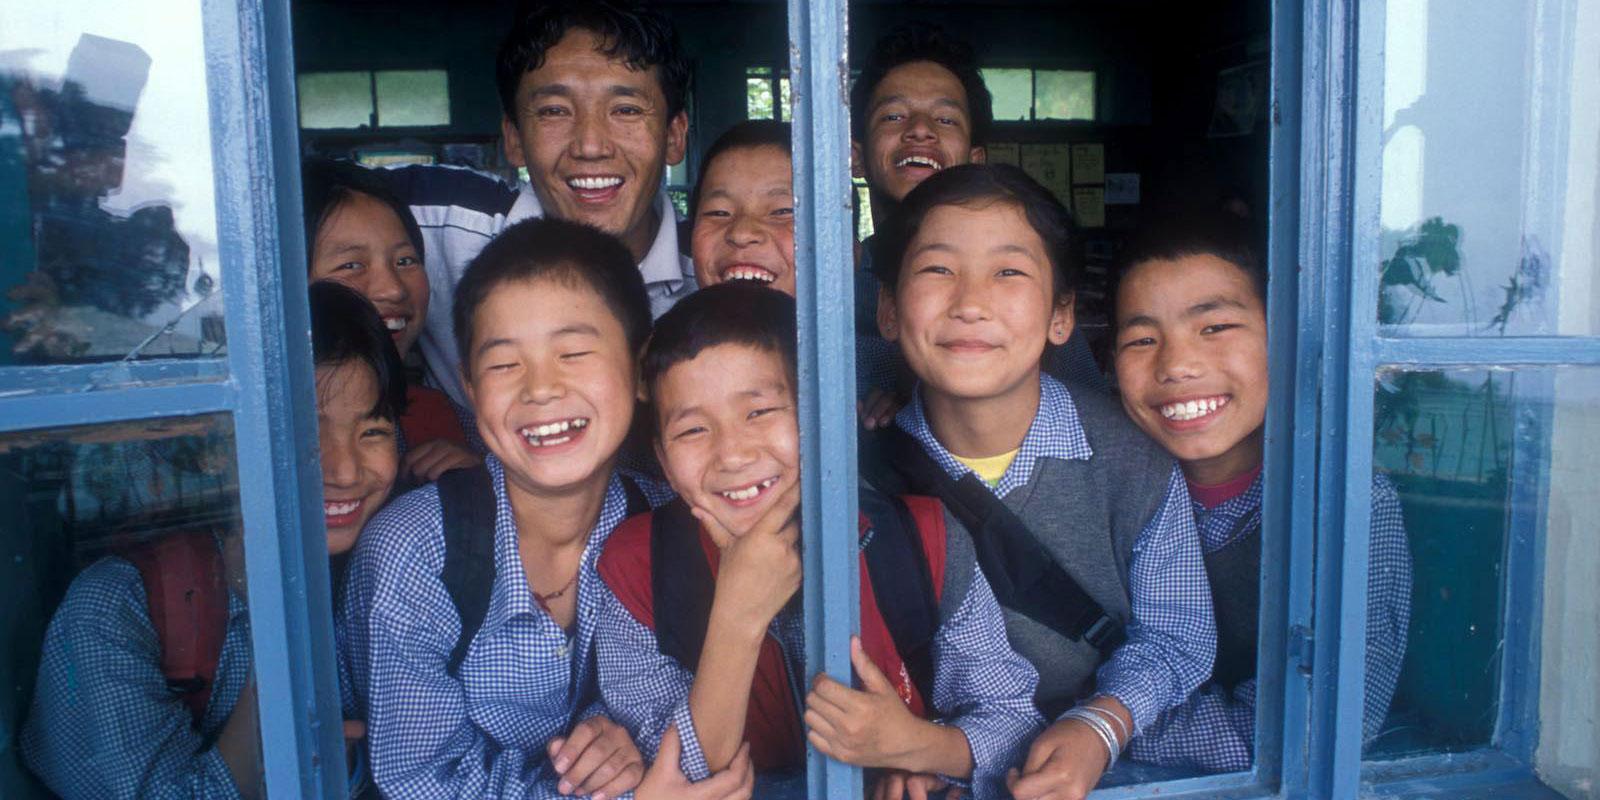 Group of children in school uniforms looking out a window, smiling.
